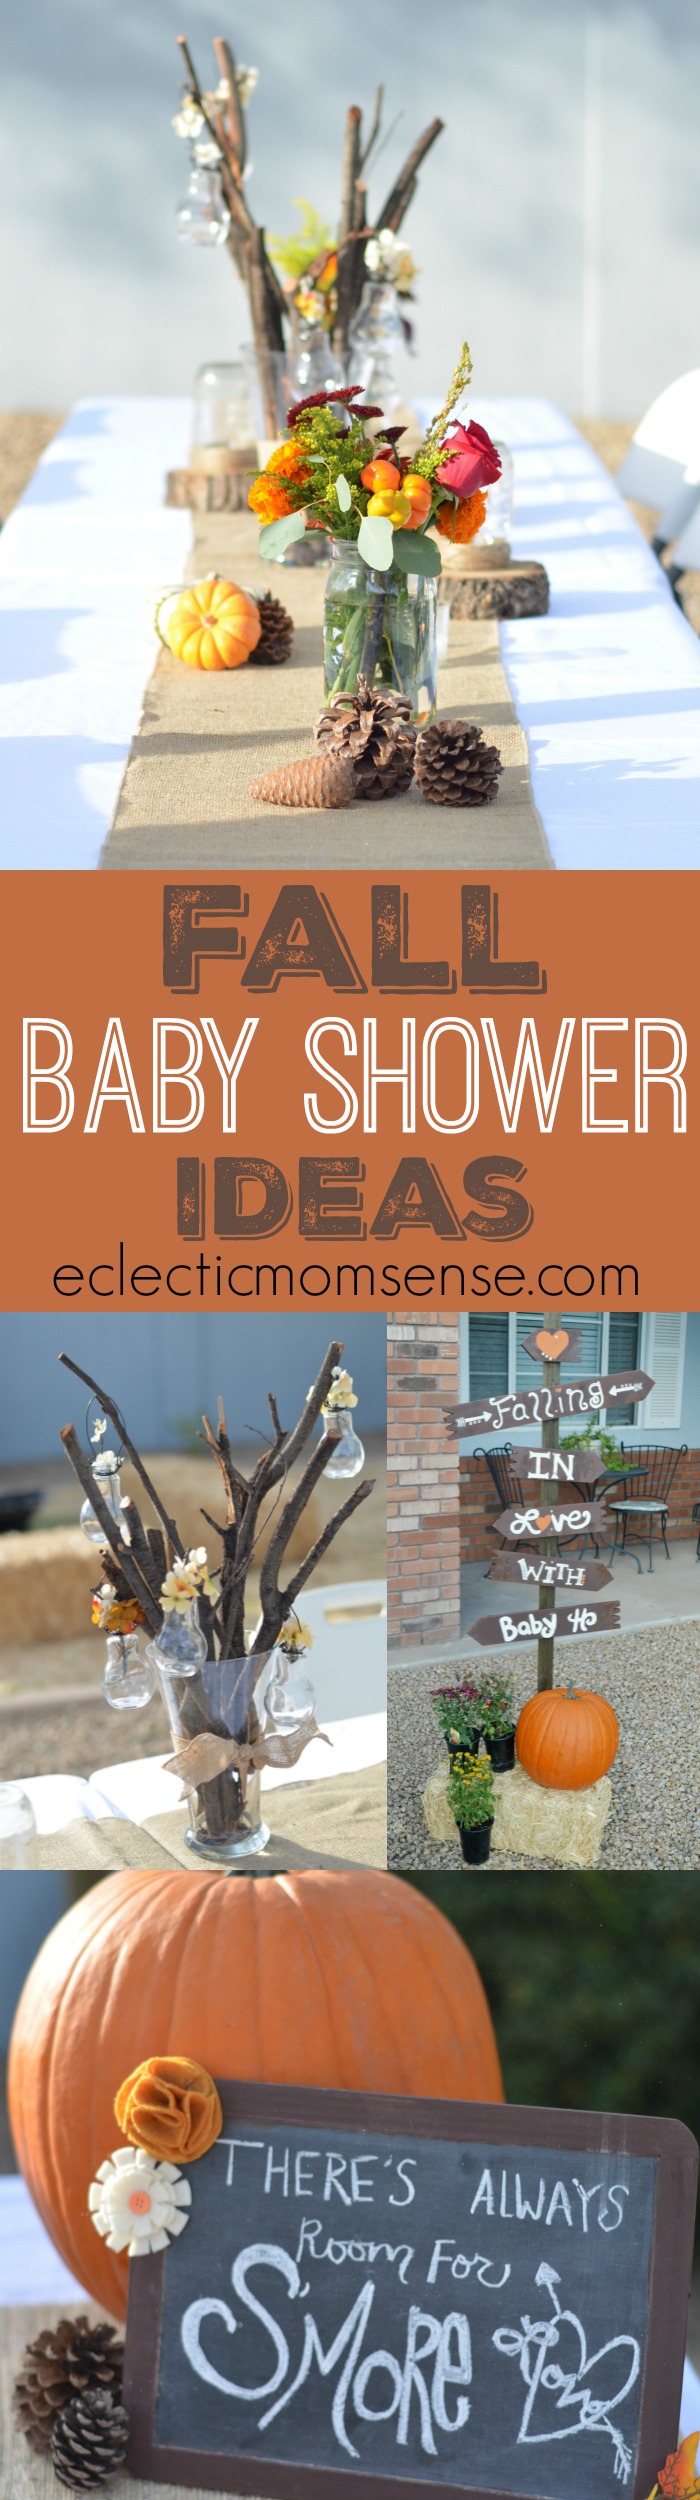 Fall in Love with Baby {shower} - Eclectic Momsense